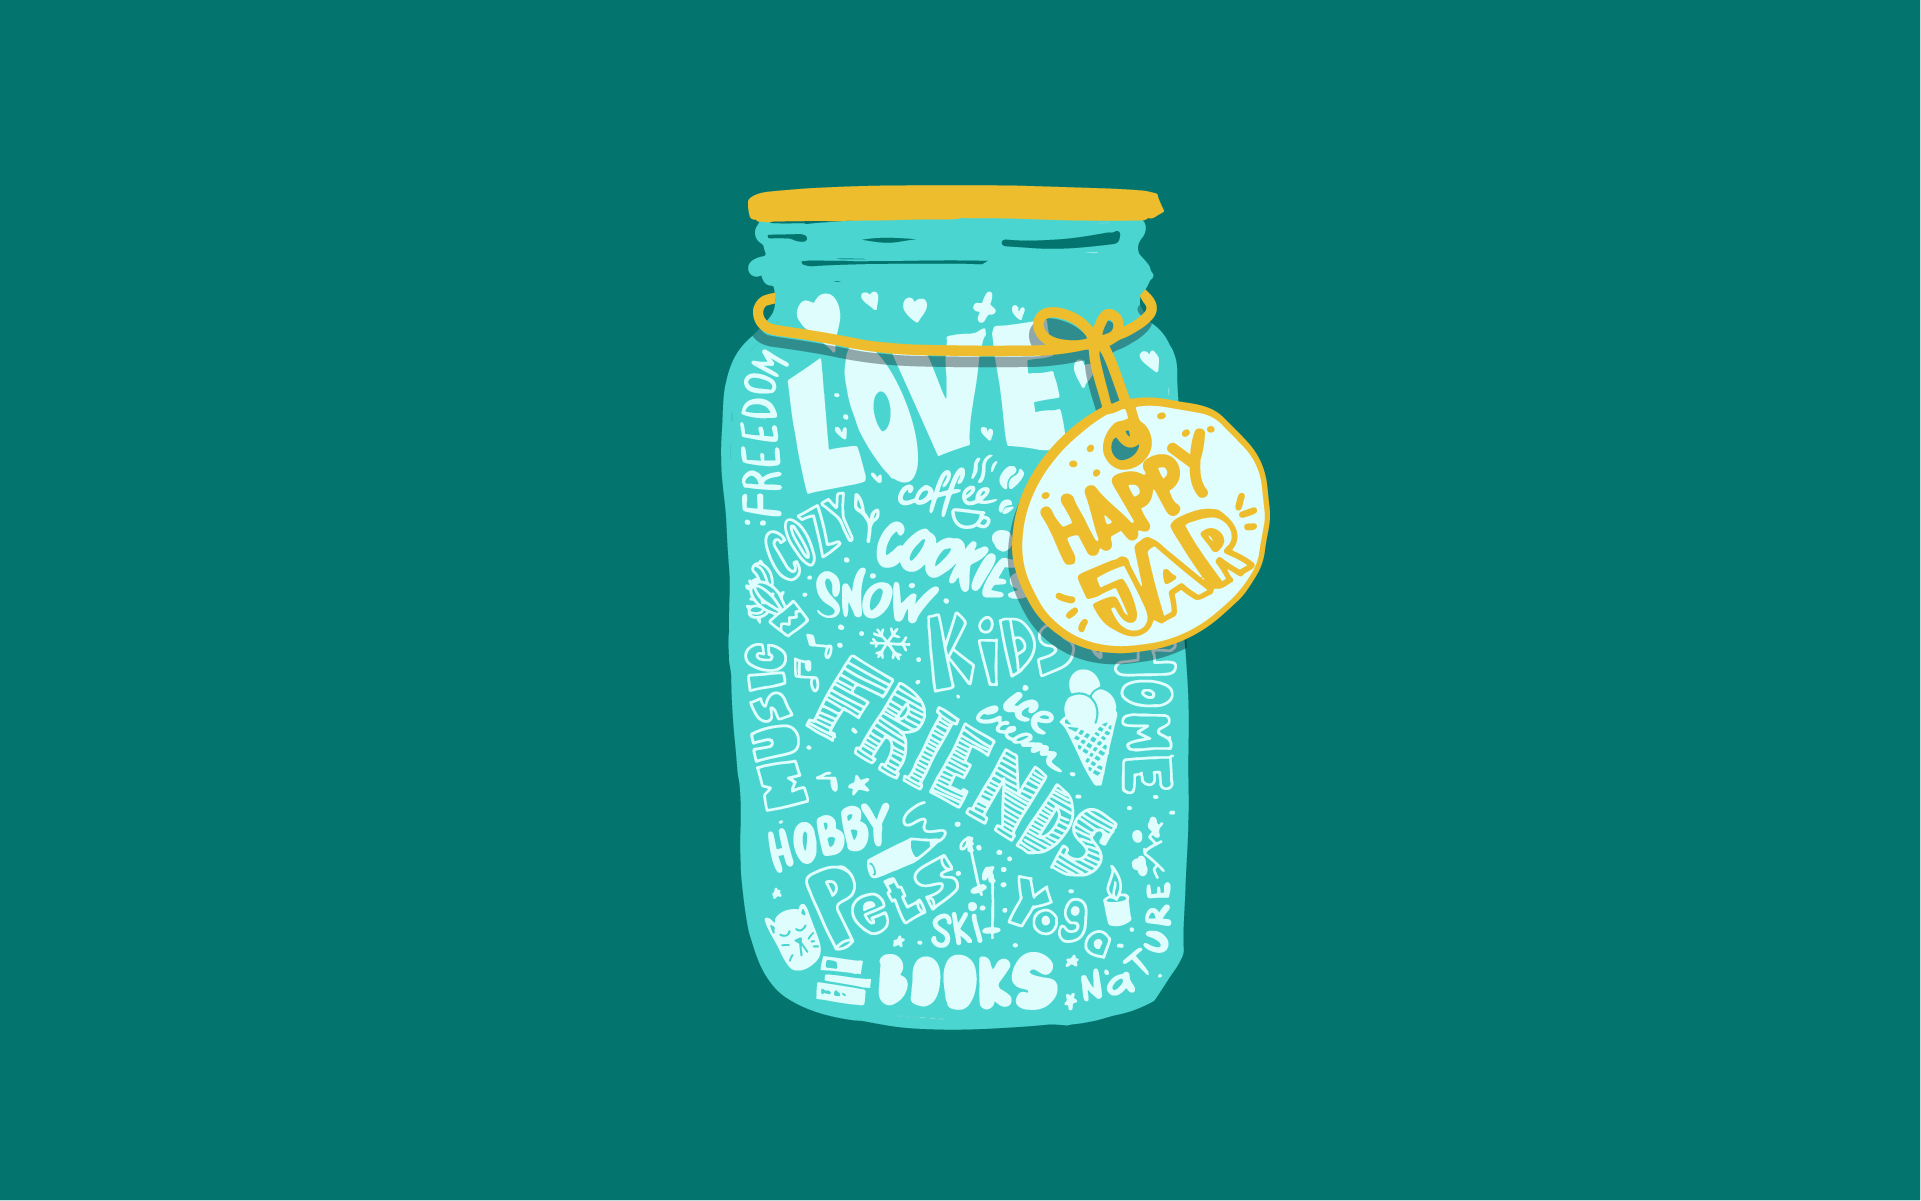 When life gives you lemons, put them in your Happy Jar